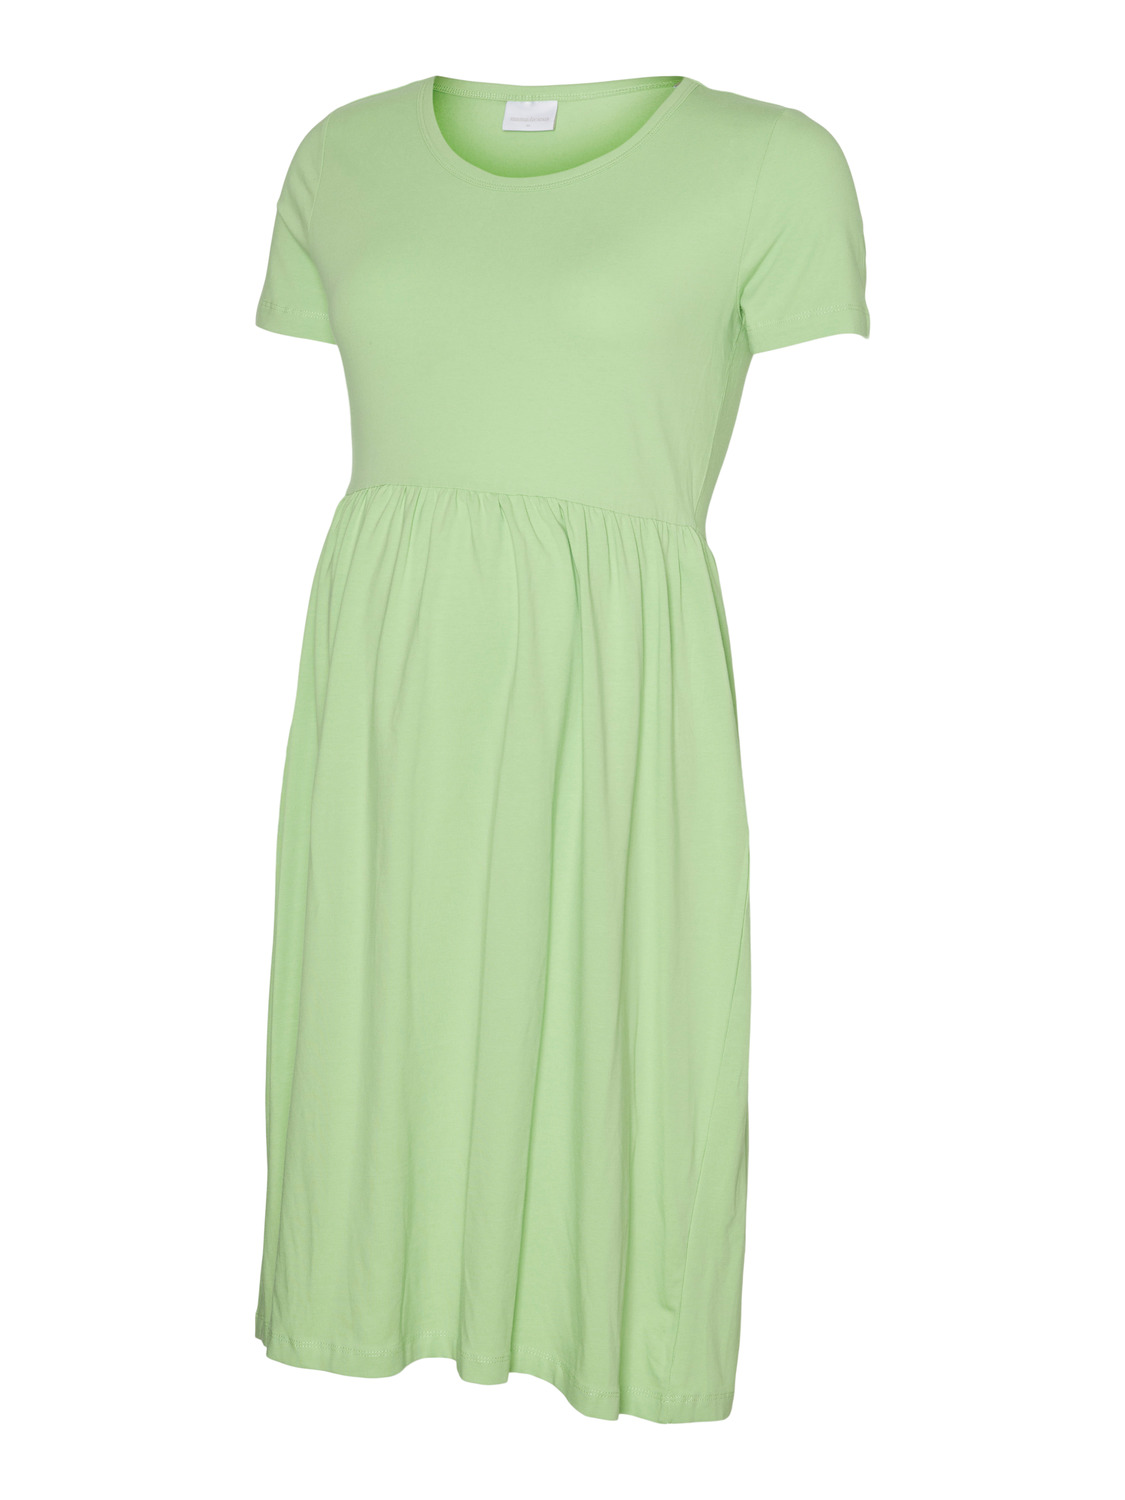 MAMA.LICIOUS Umstands-Kleid -Jade Lime - 20018657